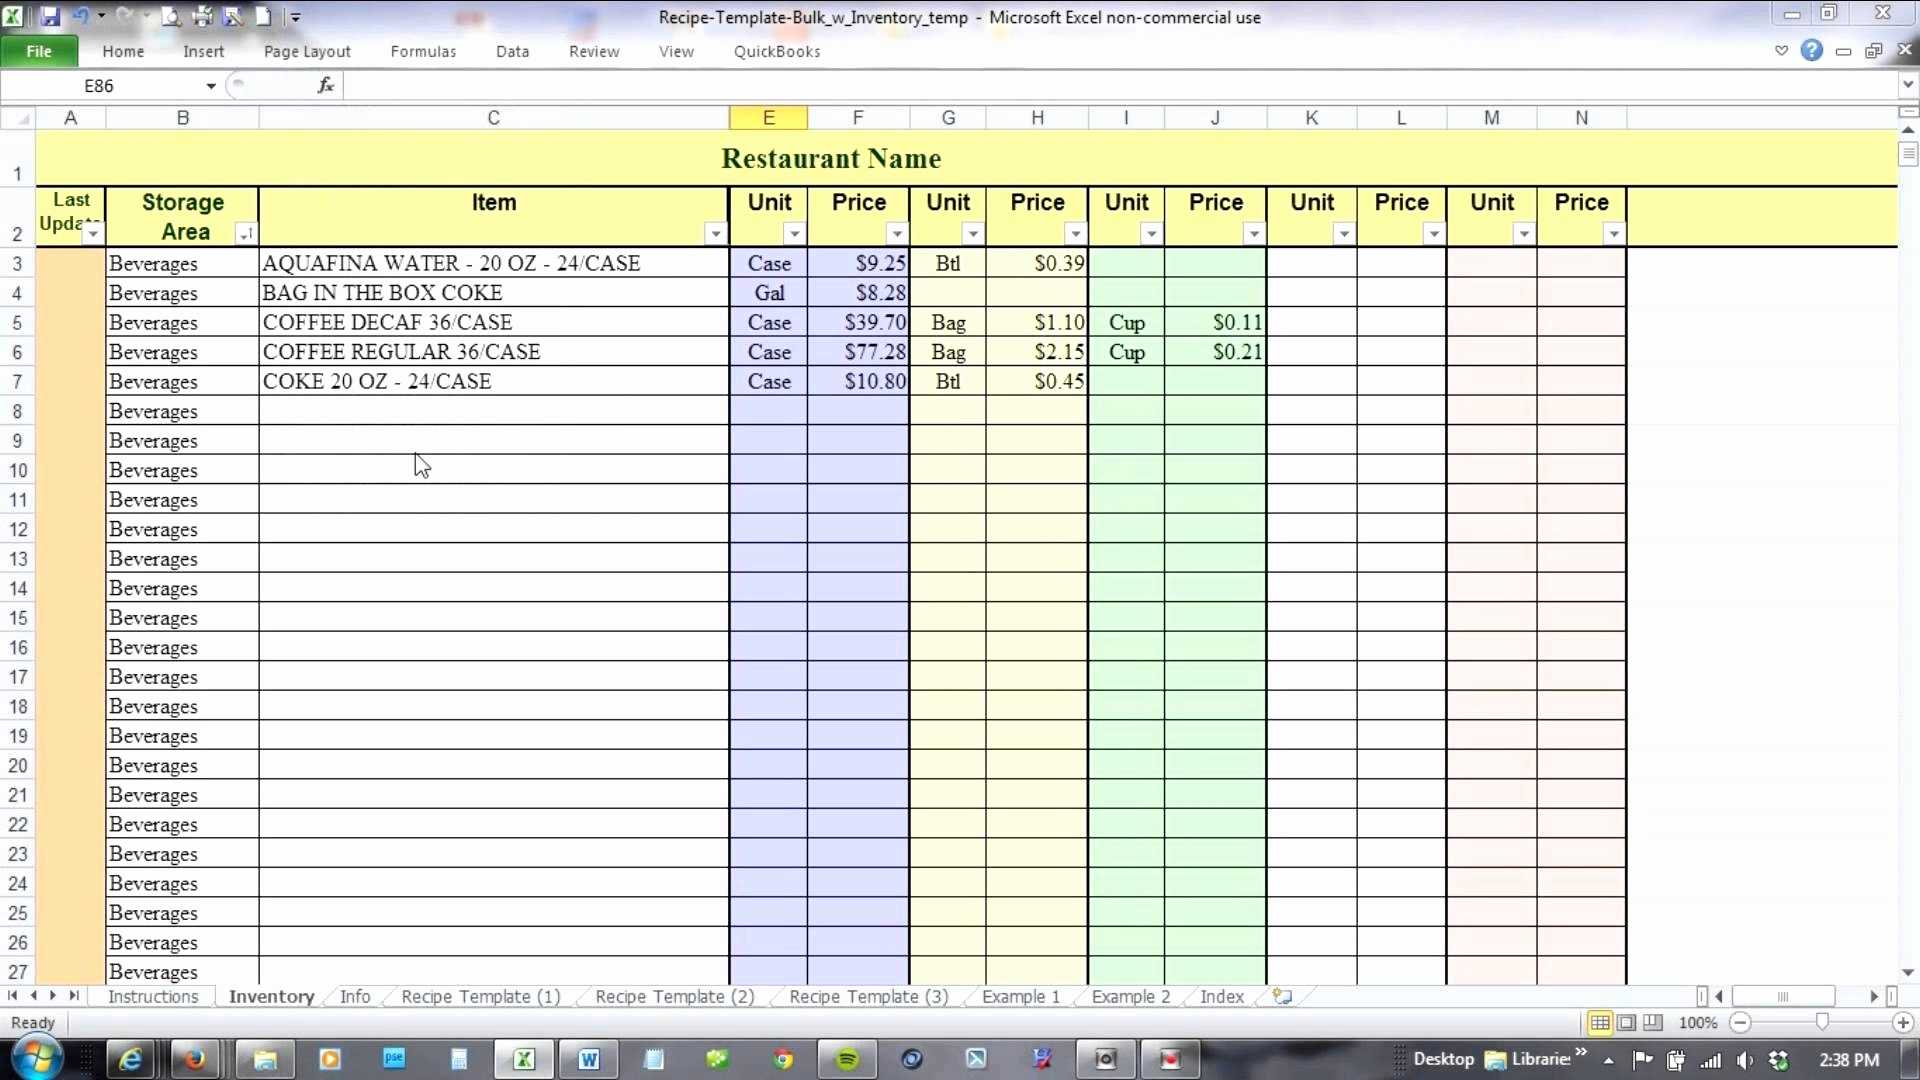 Science tools Worksheet as Well as Pare Excel Spreadsheets 2010 for Work Hours Calculator Excel